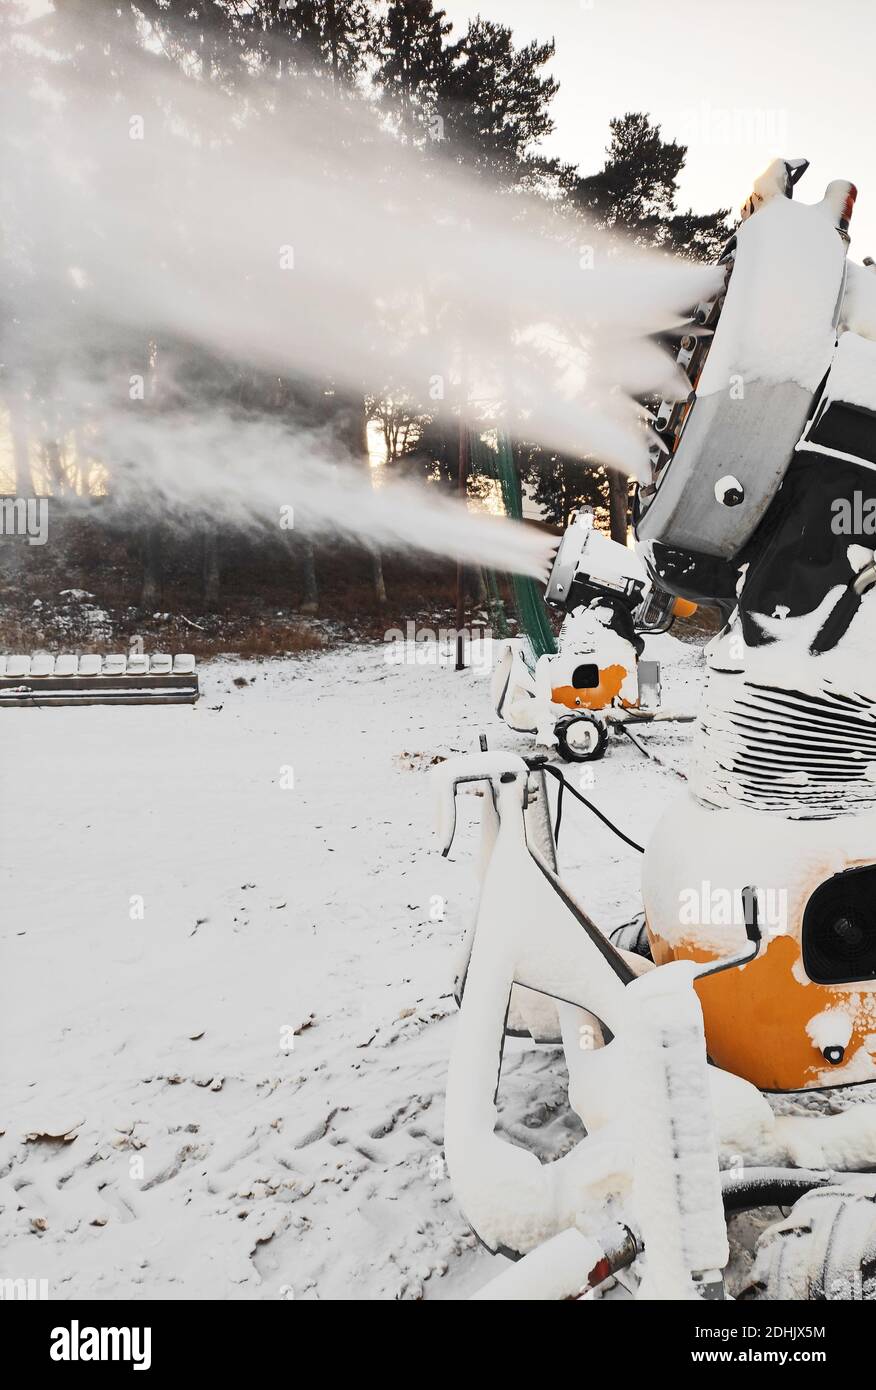 Mobile snow guns for production of artificial snow. Stock Photo